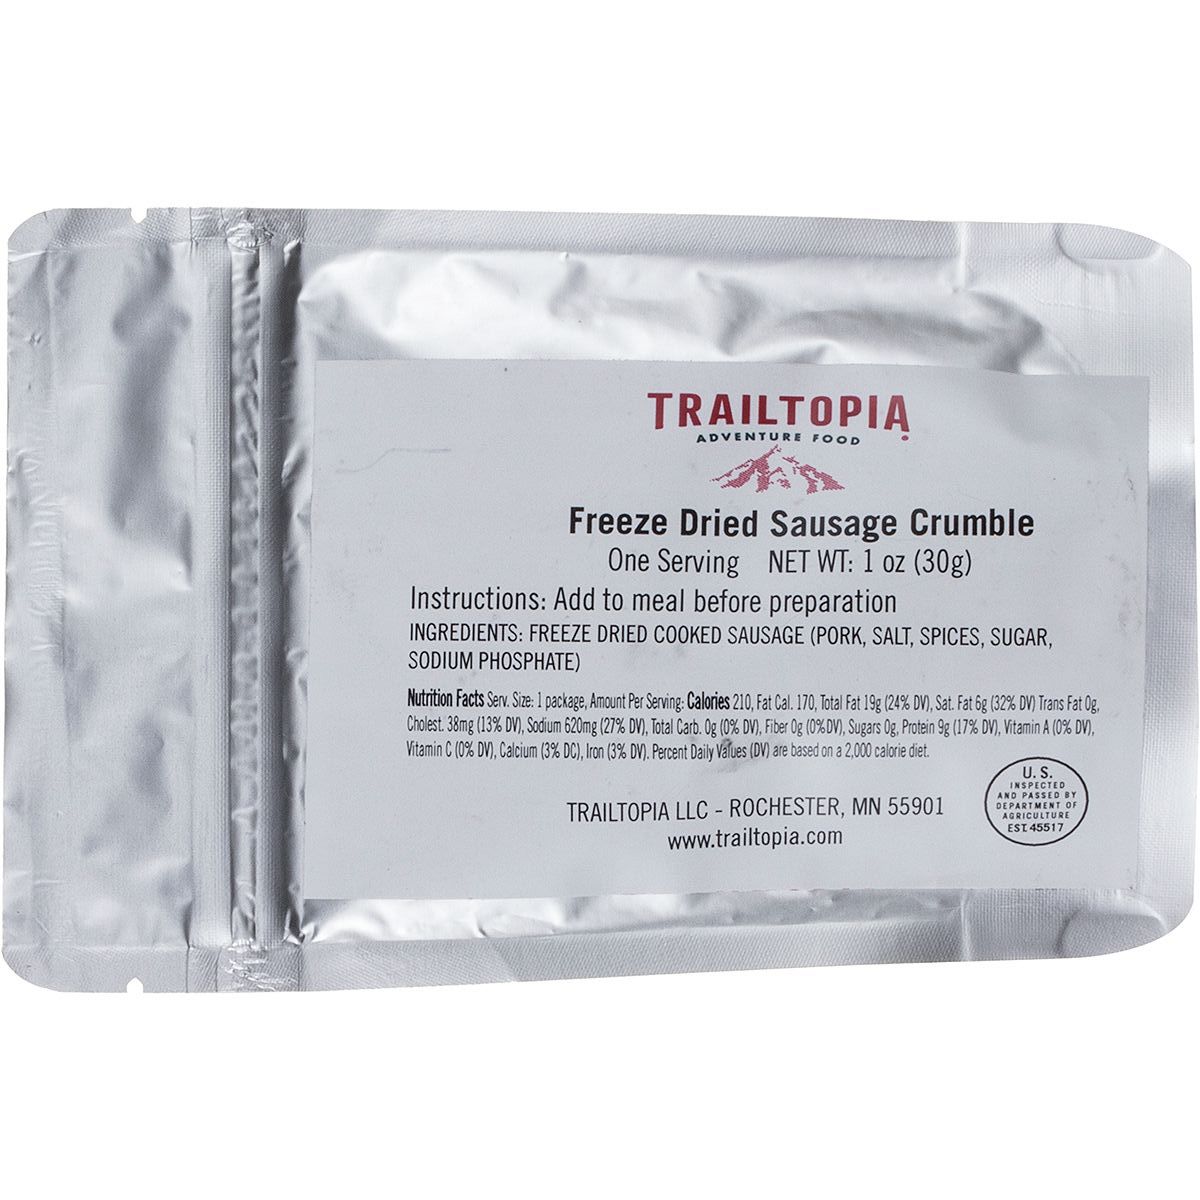 Trailtopia Sausage Crumble Side Pack